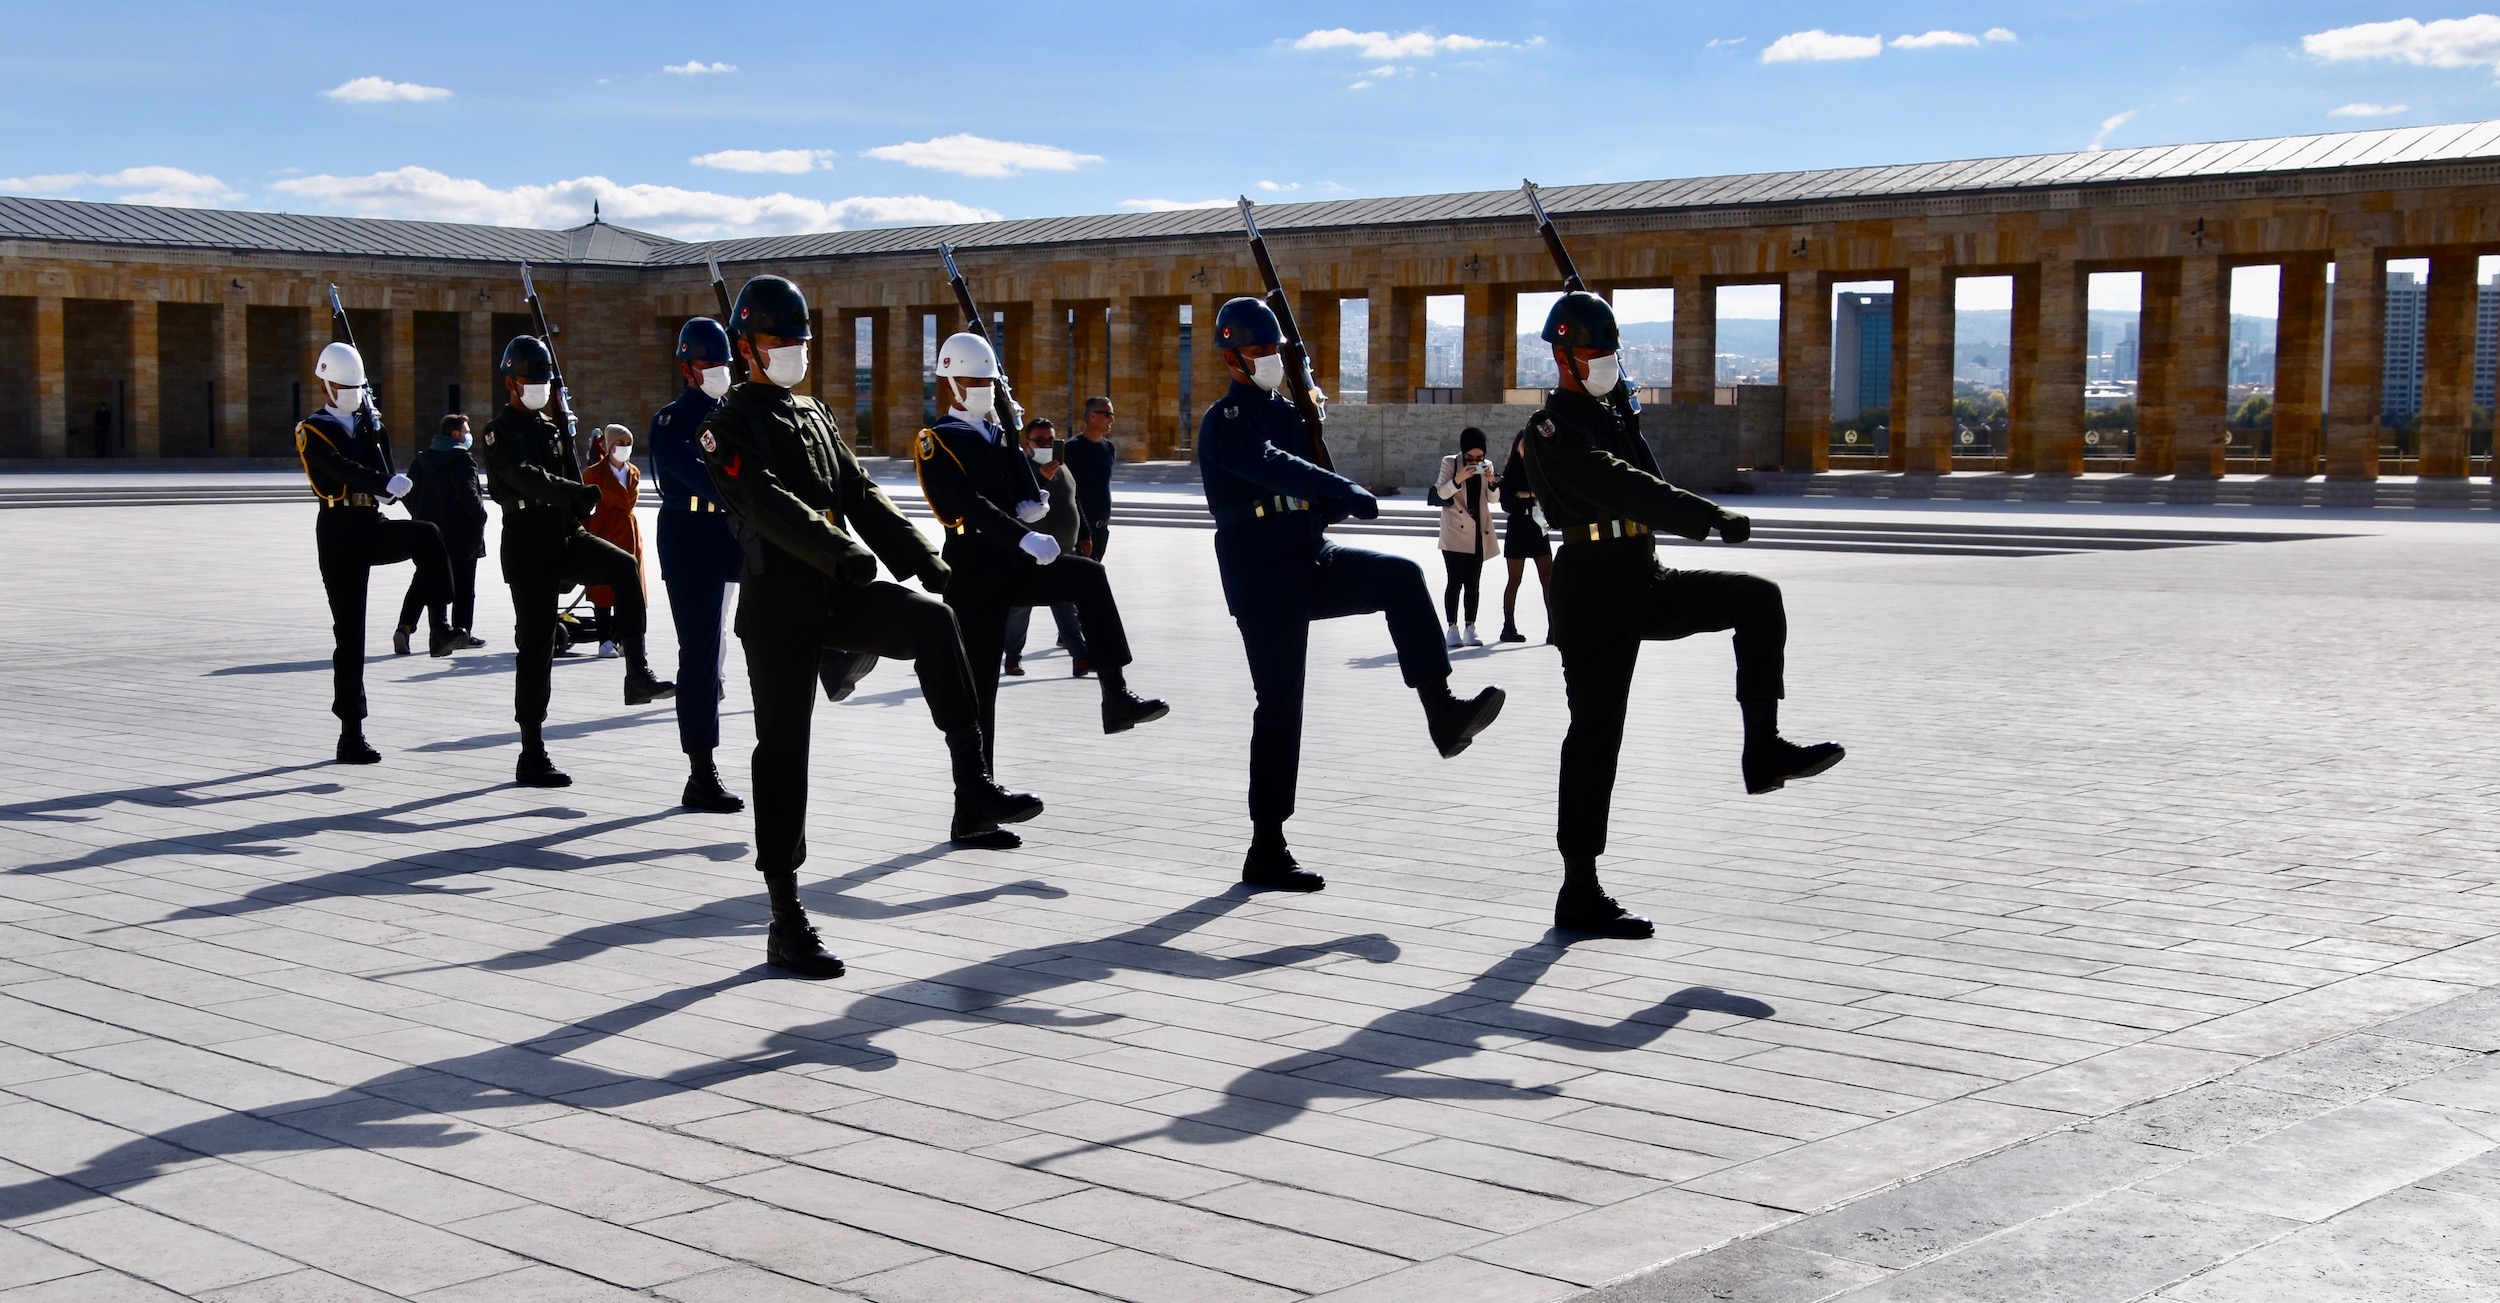 Marching Soldiers, Ceremonial Plaza, Ankara